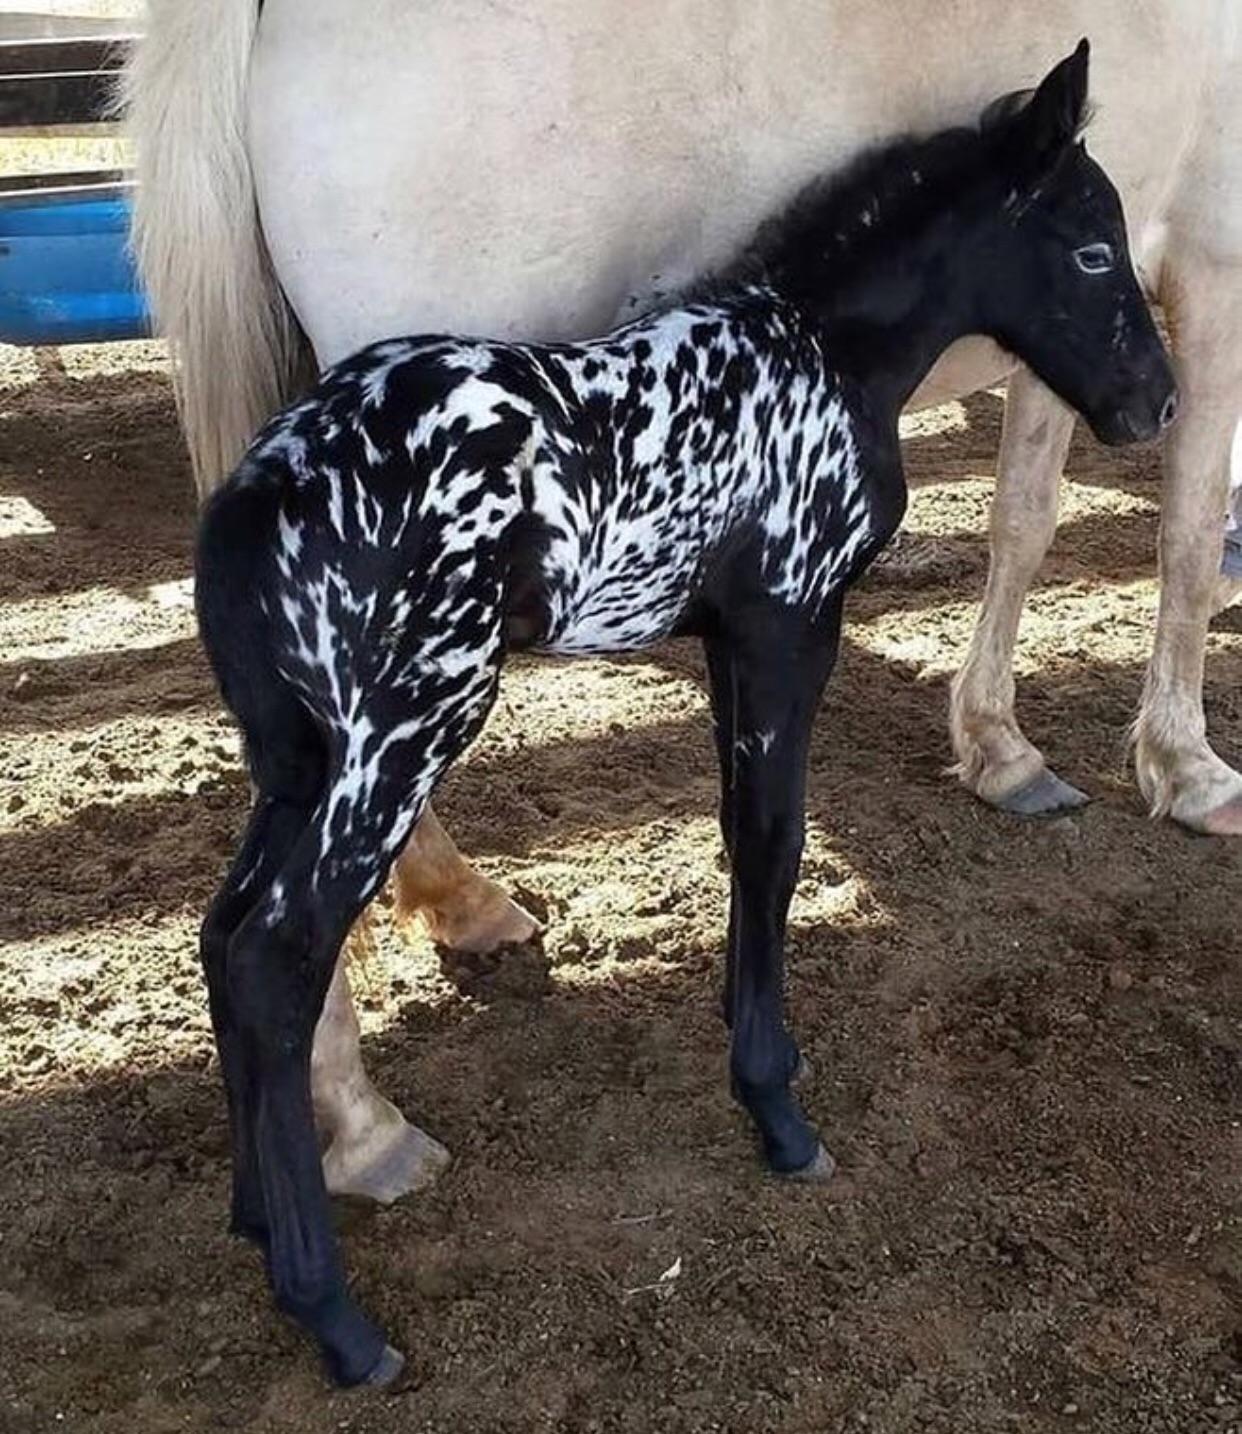 Marbled horse is small and adorable.